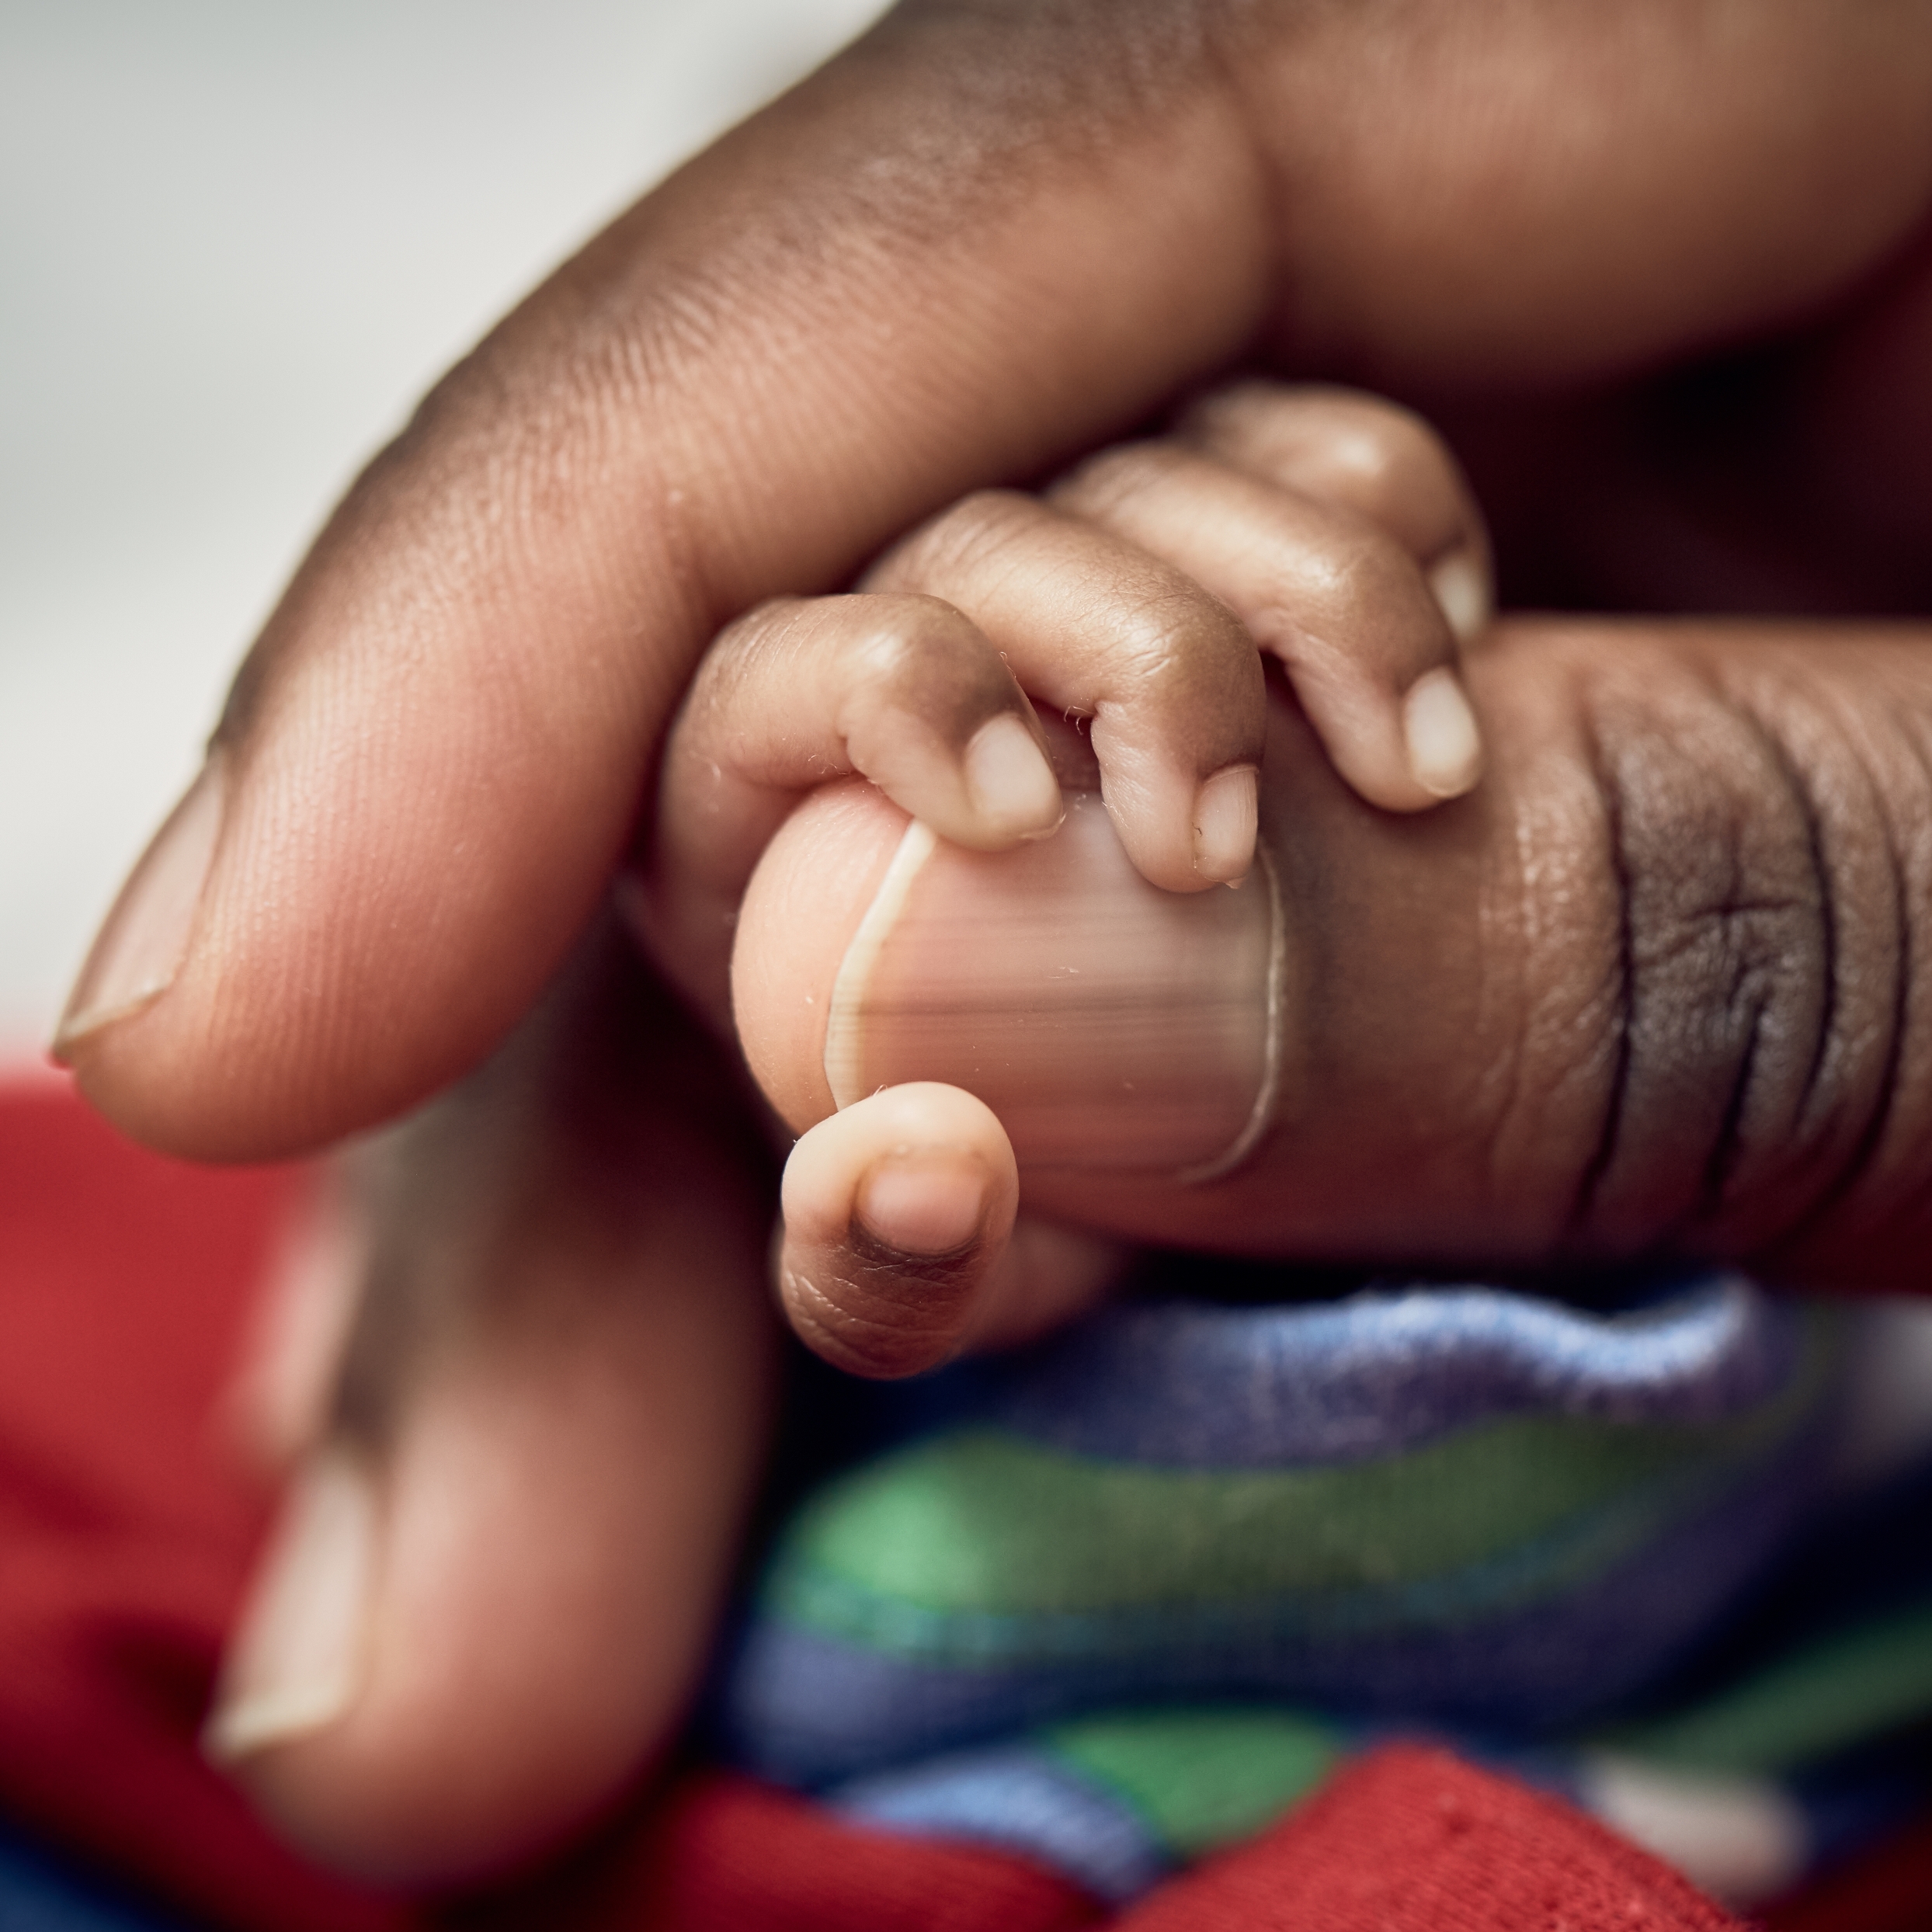 A Ugandan baby’s tiny hand is wrapped around his mother’s thumb.  The baby was born a twin and born prematurely – at 7 months – with a birthweight of 1.13 and .95kgs each. The mother is being taught Kangaroo Mother Care, a lifesaving technique that encourages skin-to-skin contact and breastfeeding for premature babies. Photo credit: Juozas Cernius/Save the Children, March 2018.